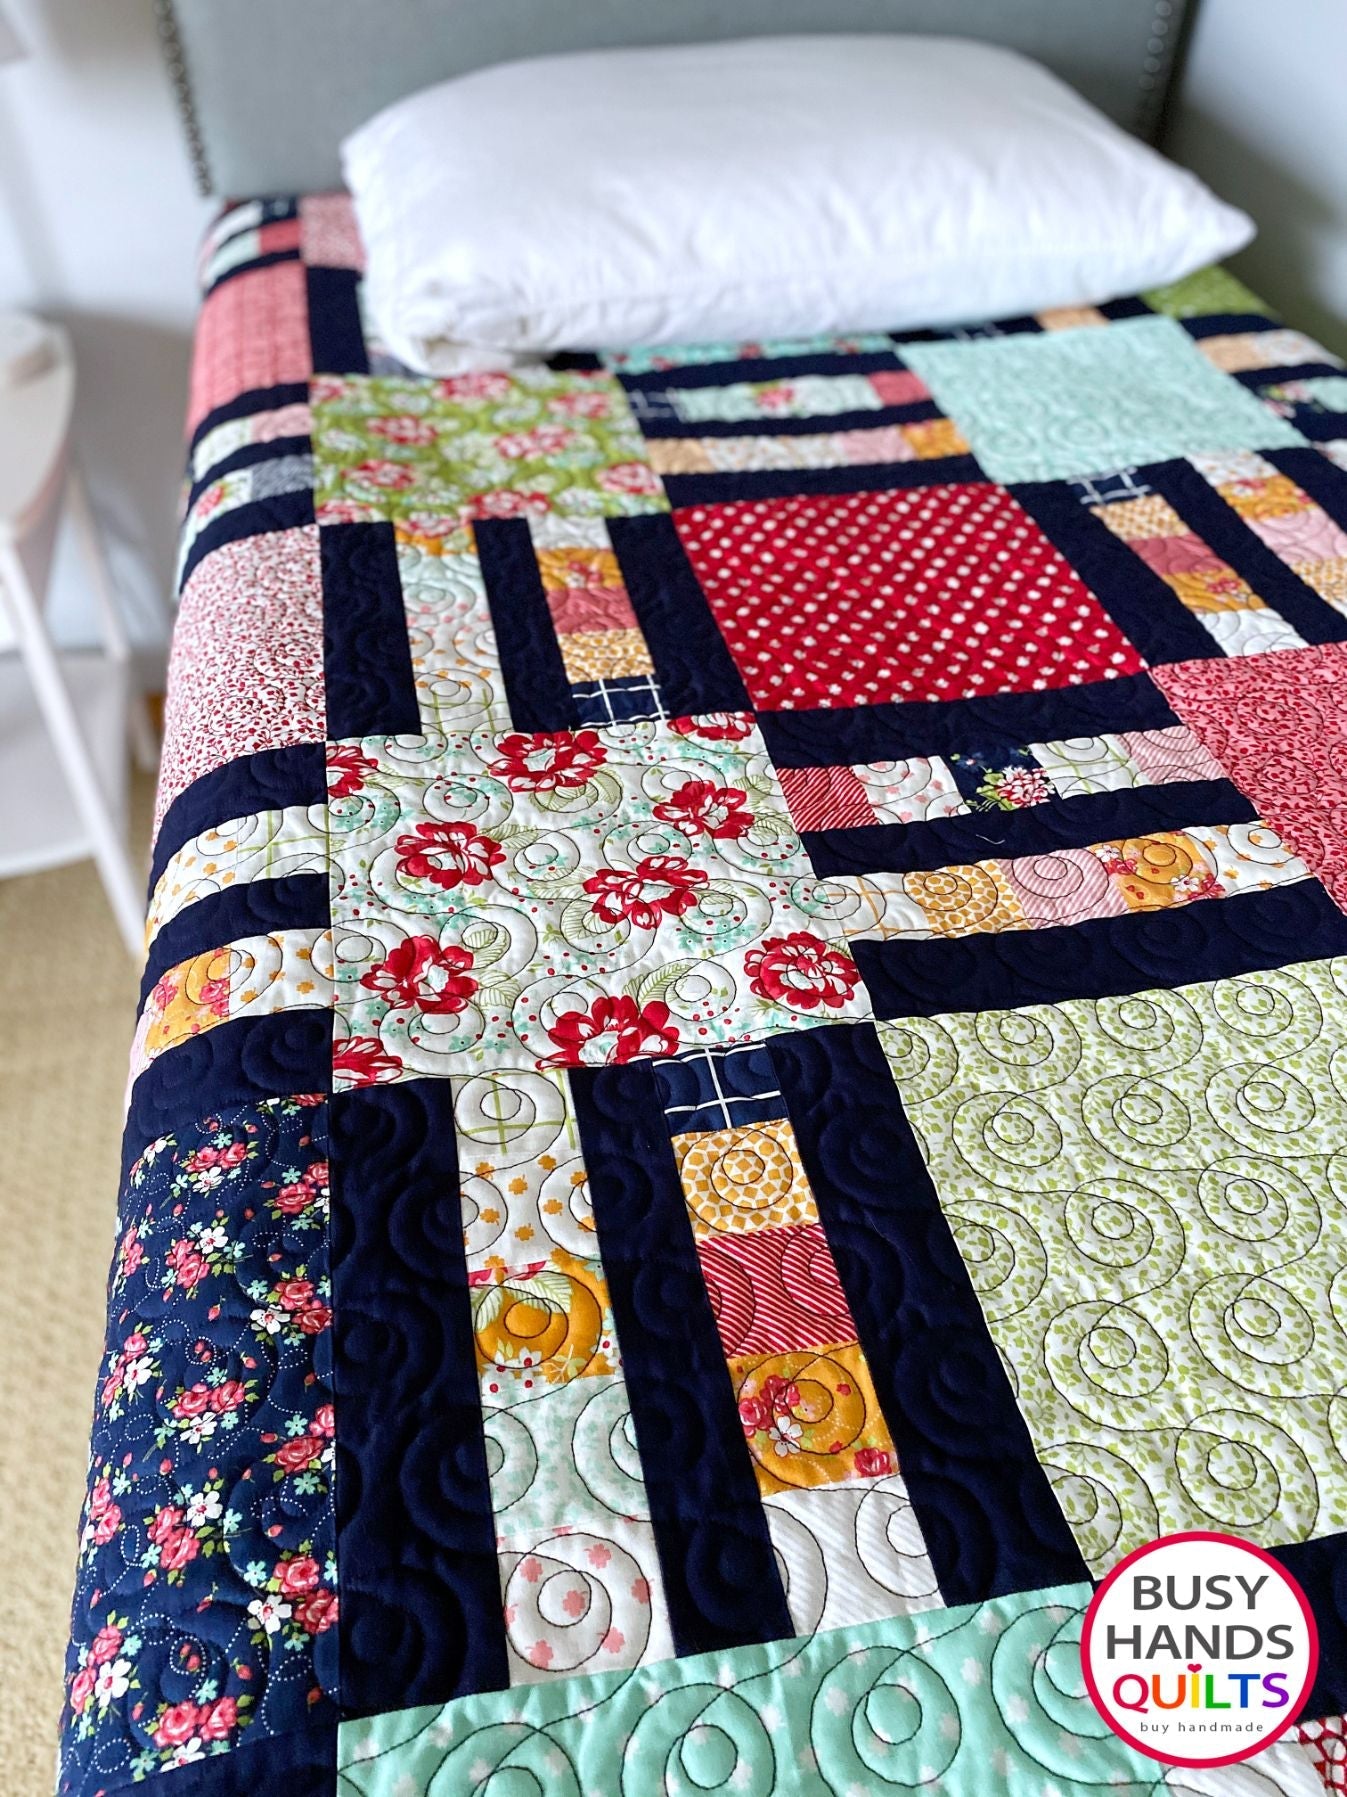 Handmade Picket Fence Square Throw Quilt in One Fine Day Busy Hands Quilts $349